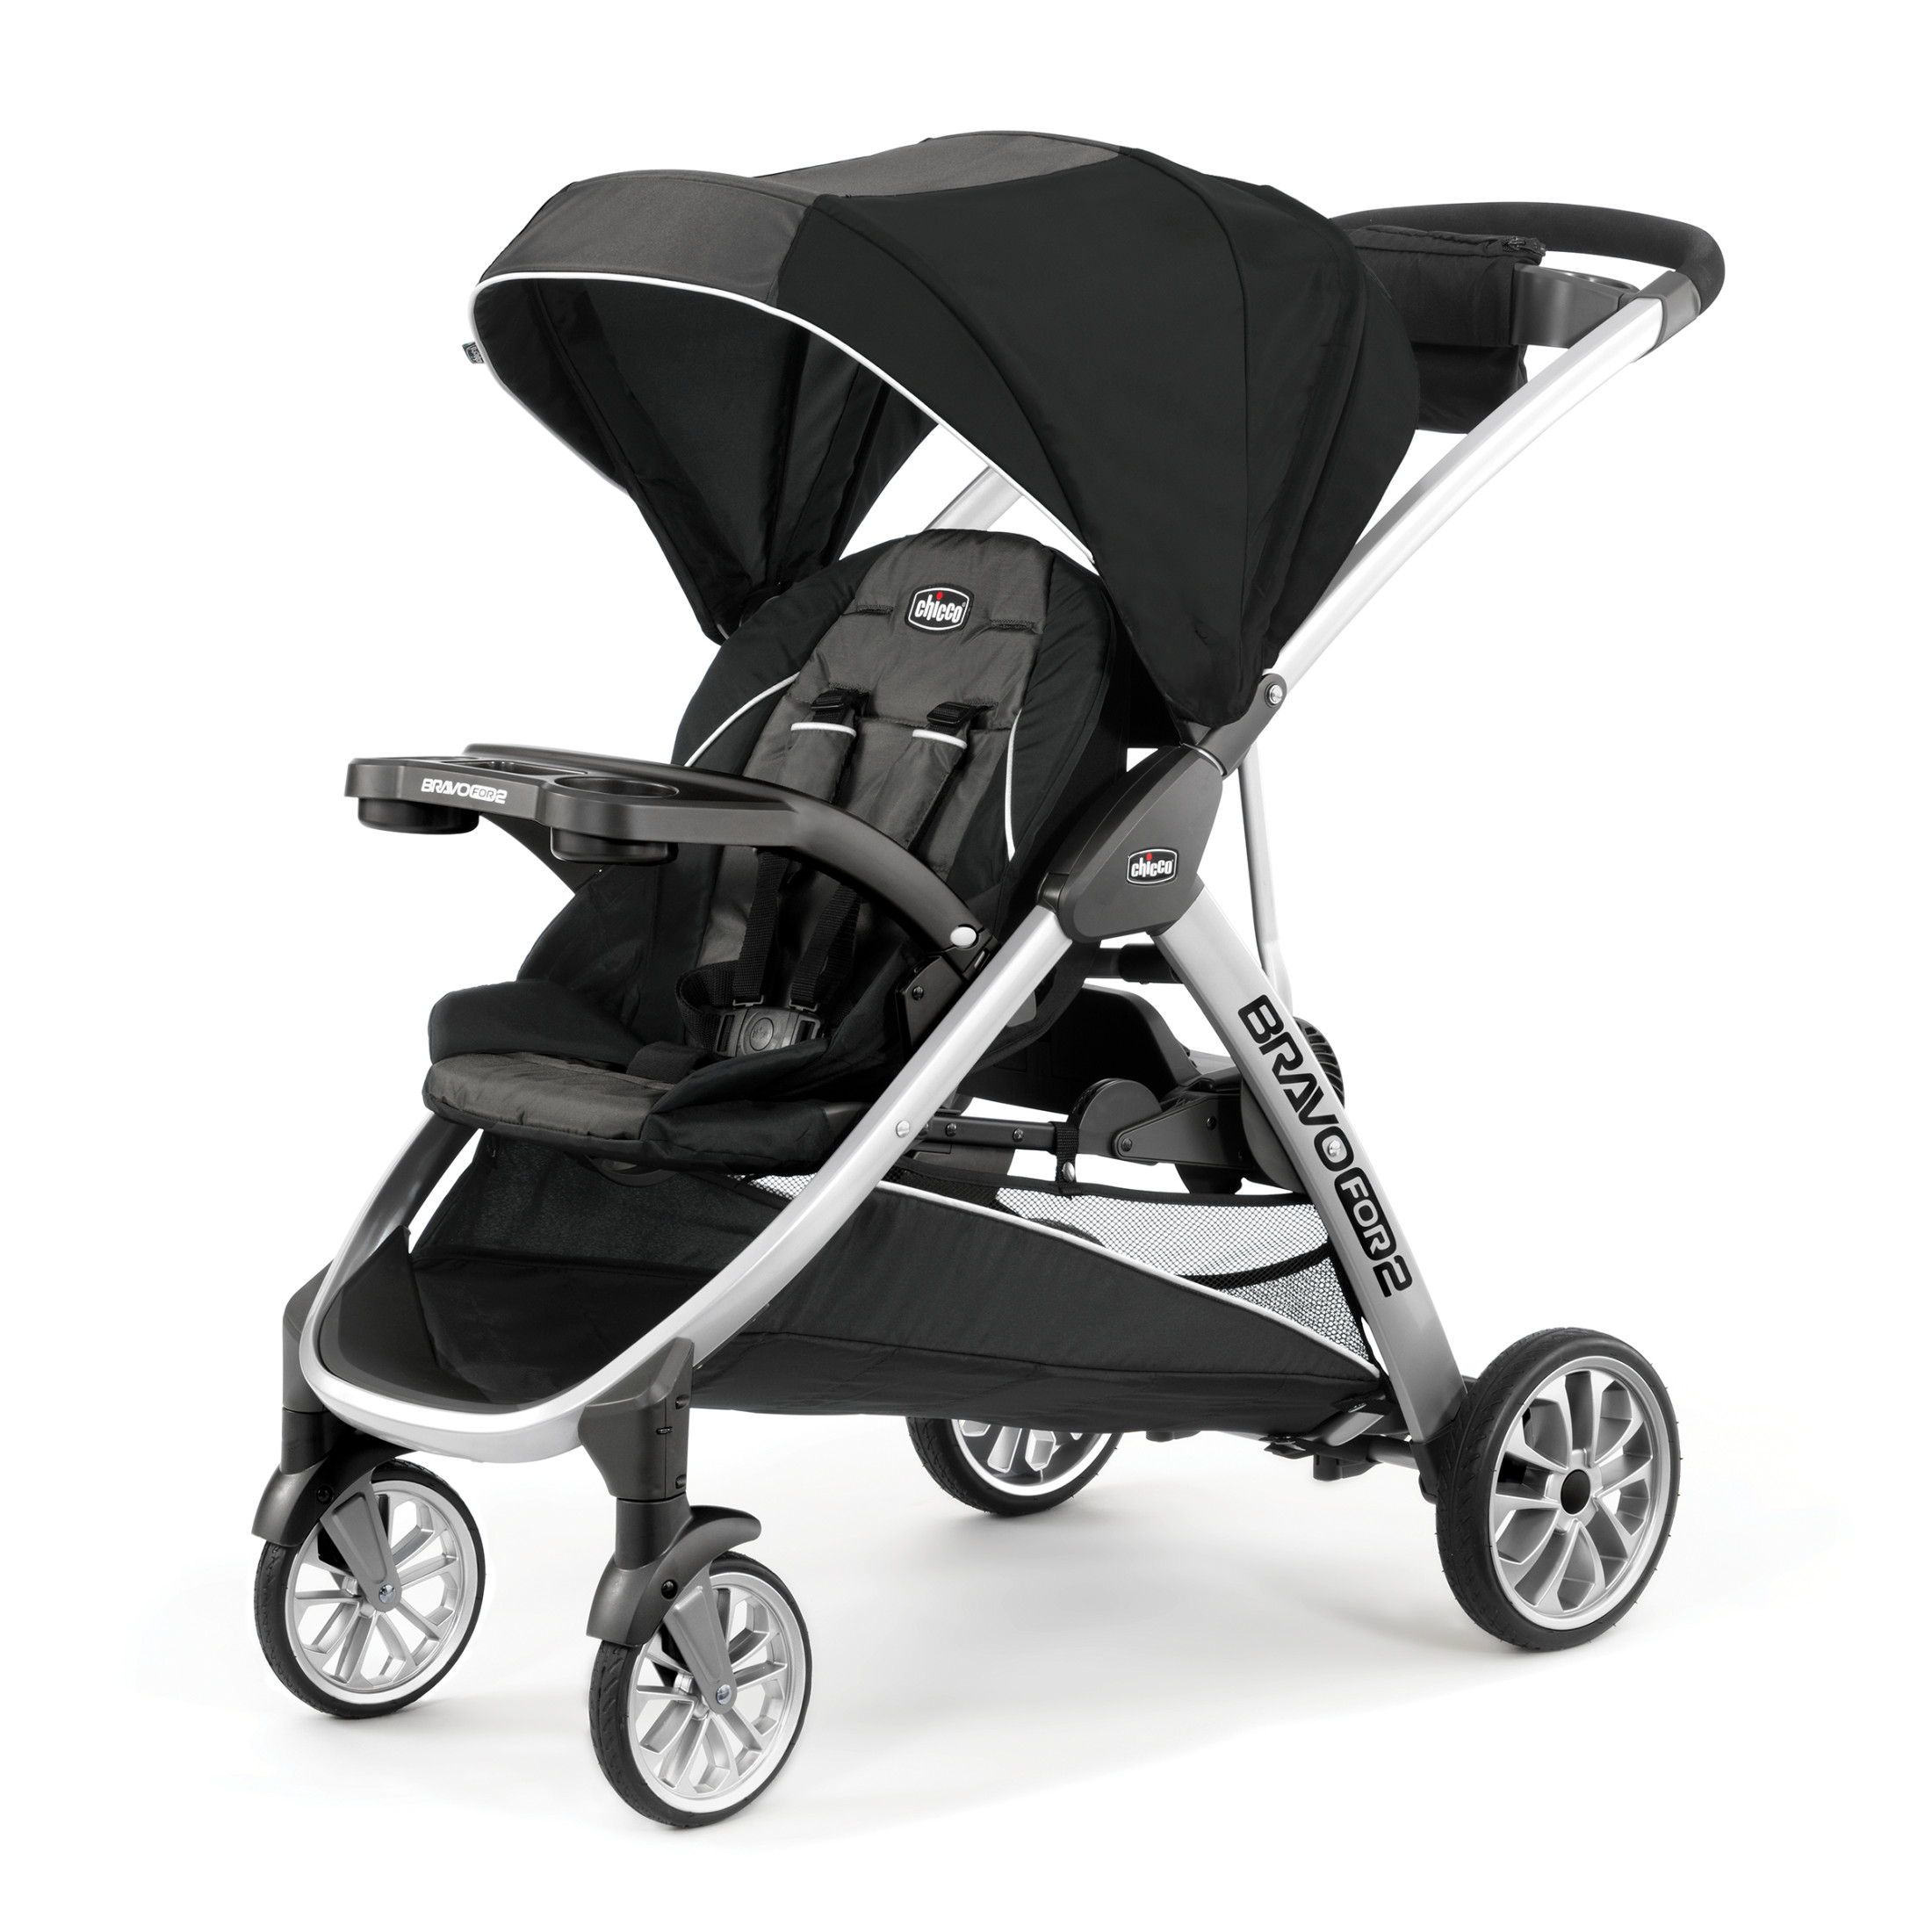 Chicco BravoFor2 Standing/Sitting Double Stroller - Iron (Black/Grey) - image 1 of 11